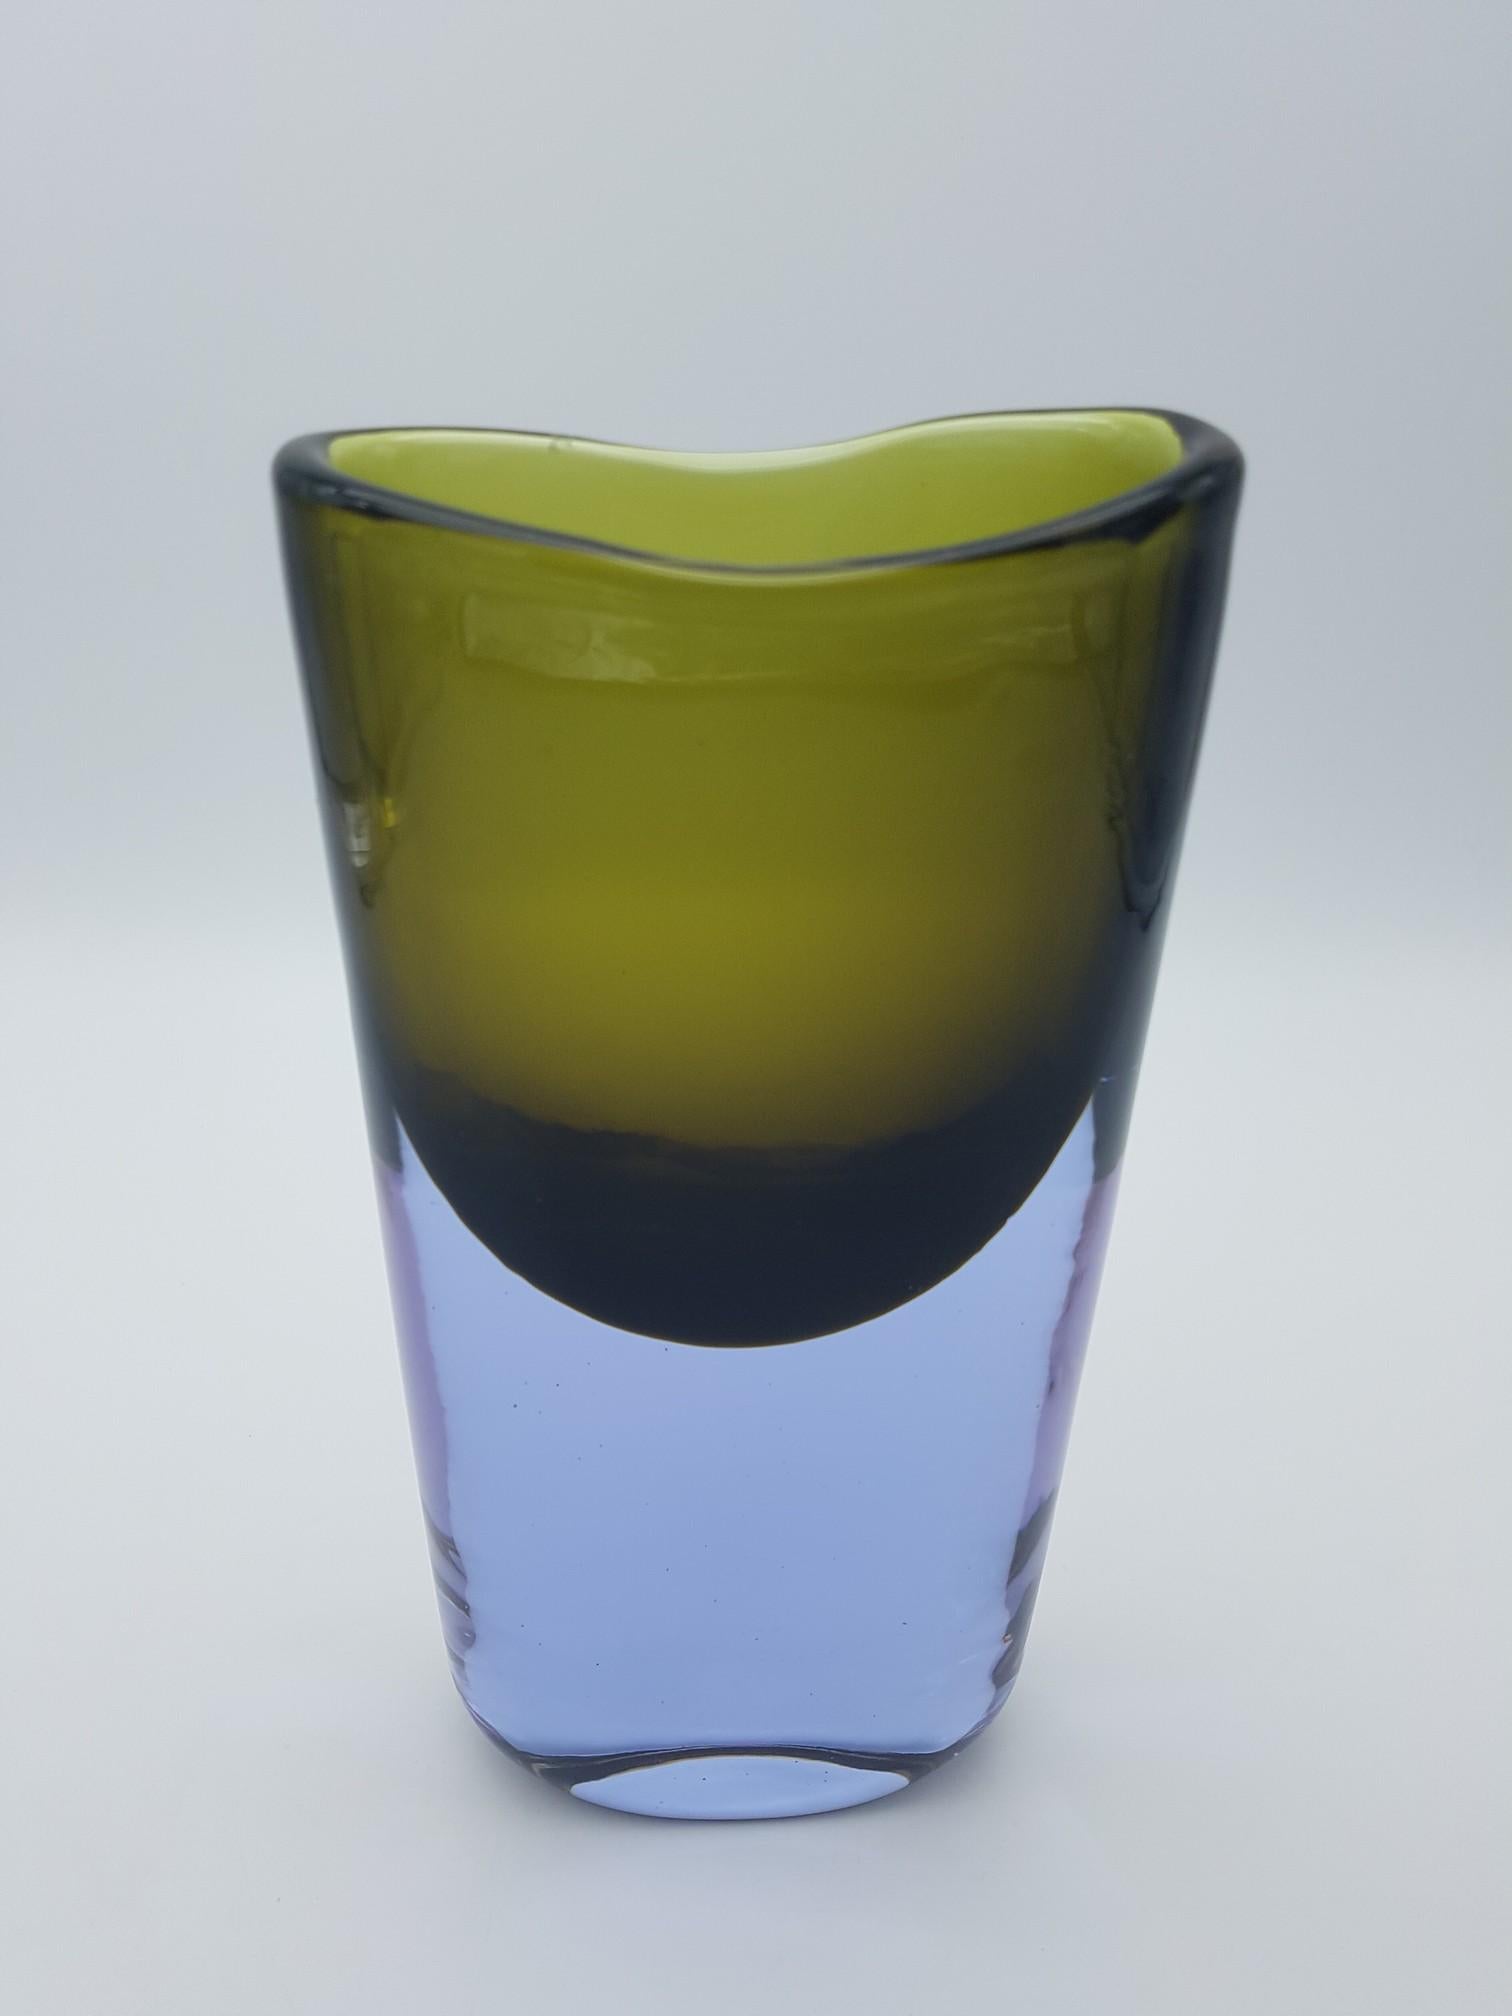 This modern and elegant Murano glass vase has been handmade by the Gino Cenedese e Figlio glass-factory in the mid-1960s, design by Antonio da Ros. The vase has an oval cross-section and features lavender and military green colors, he lavender color